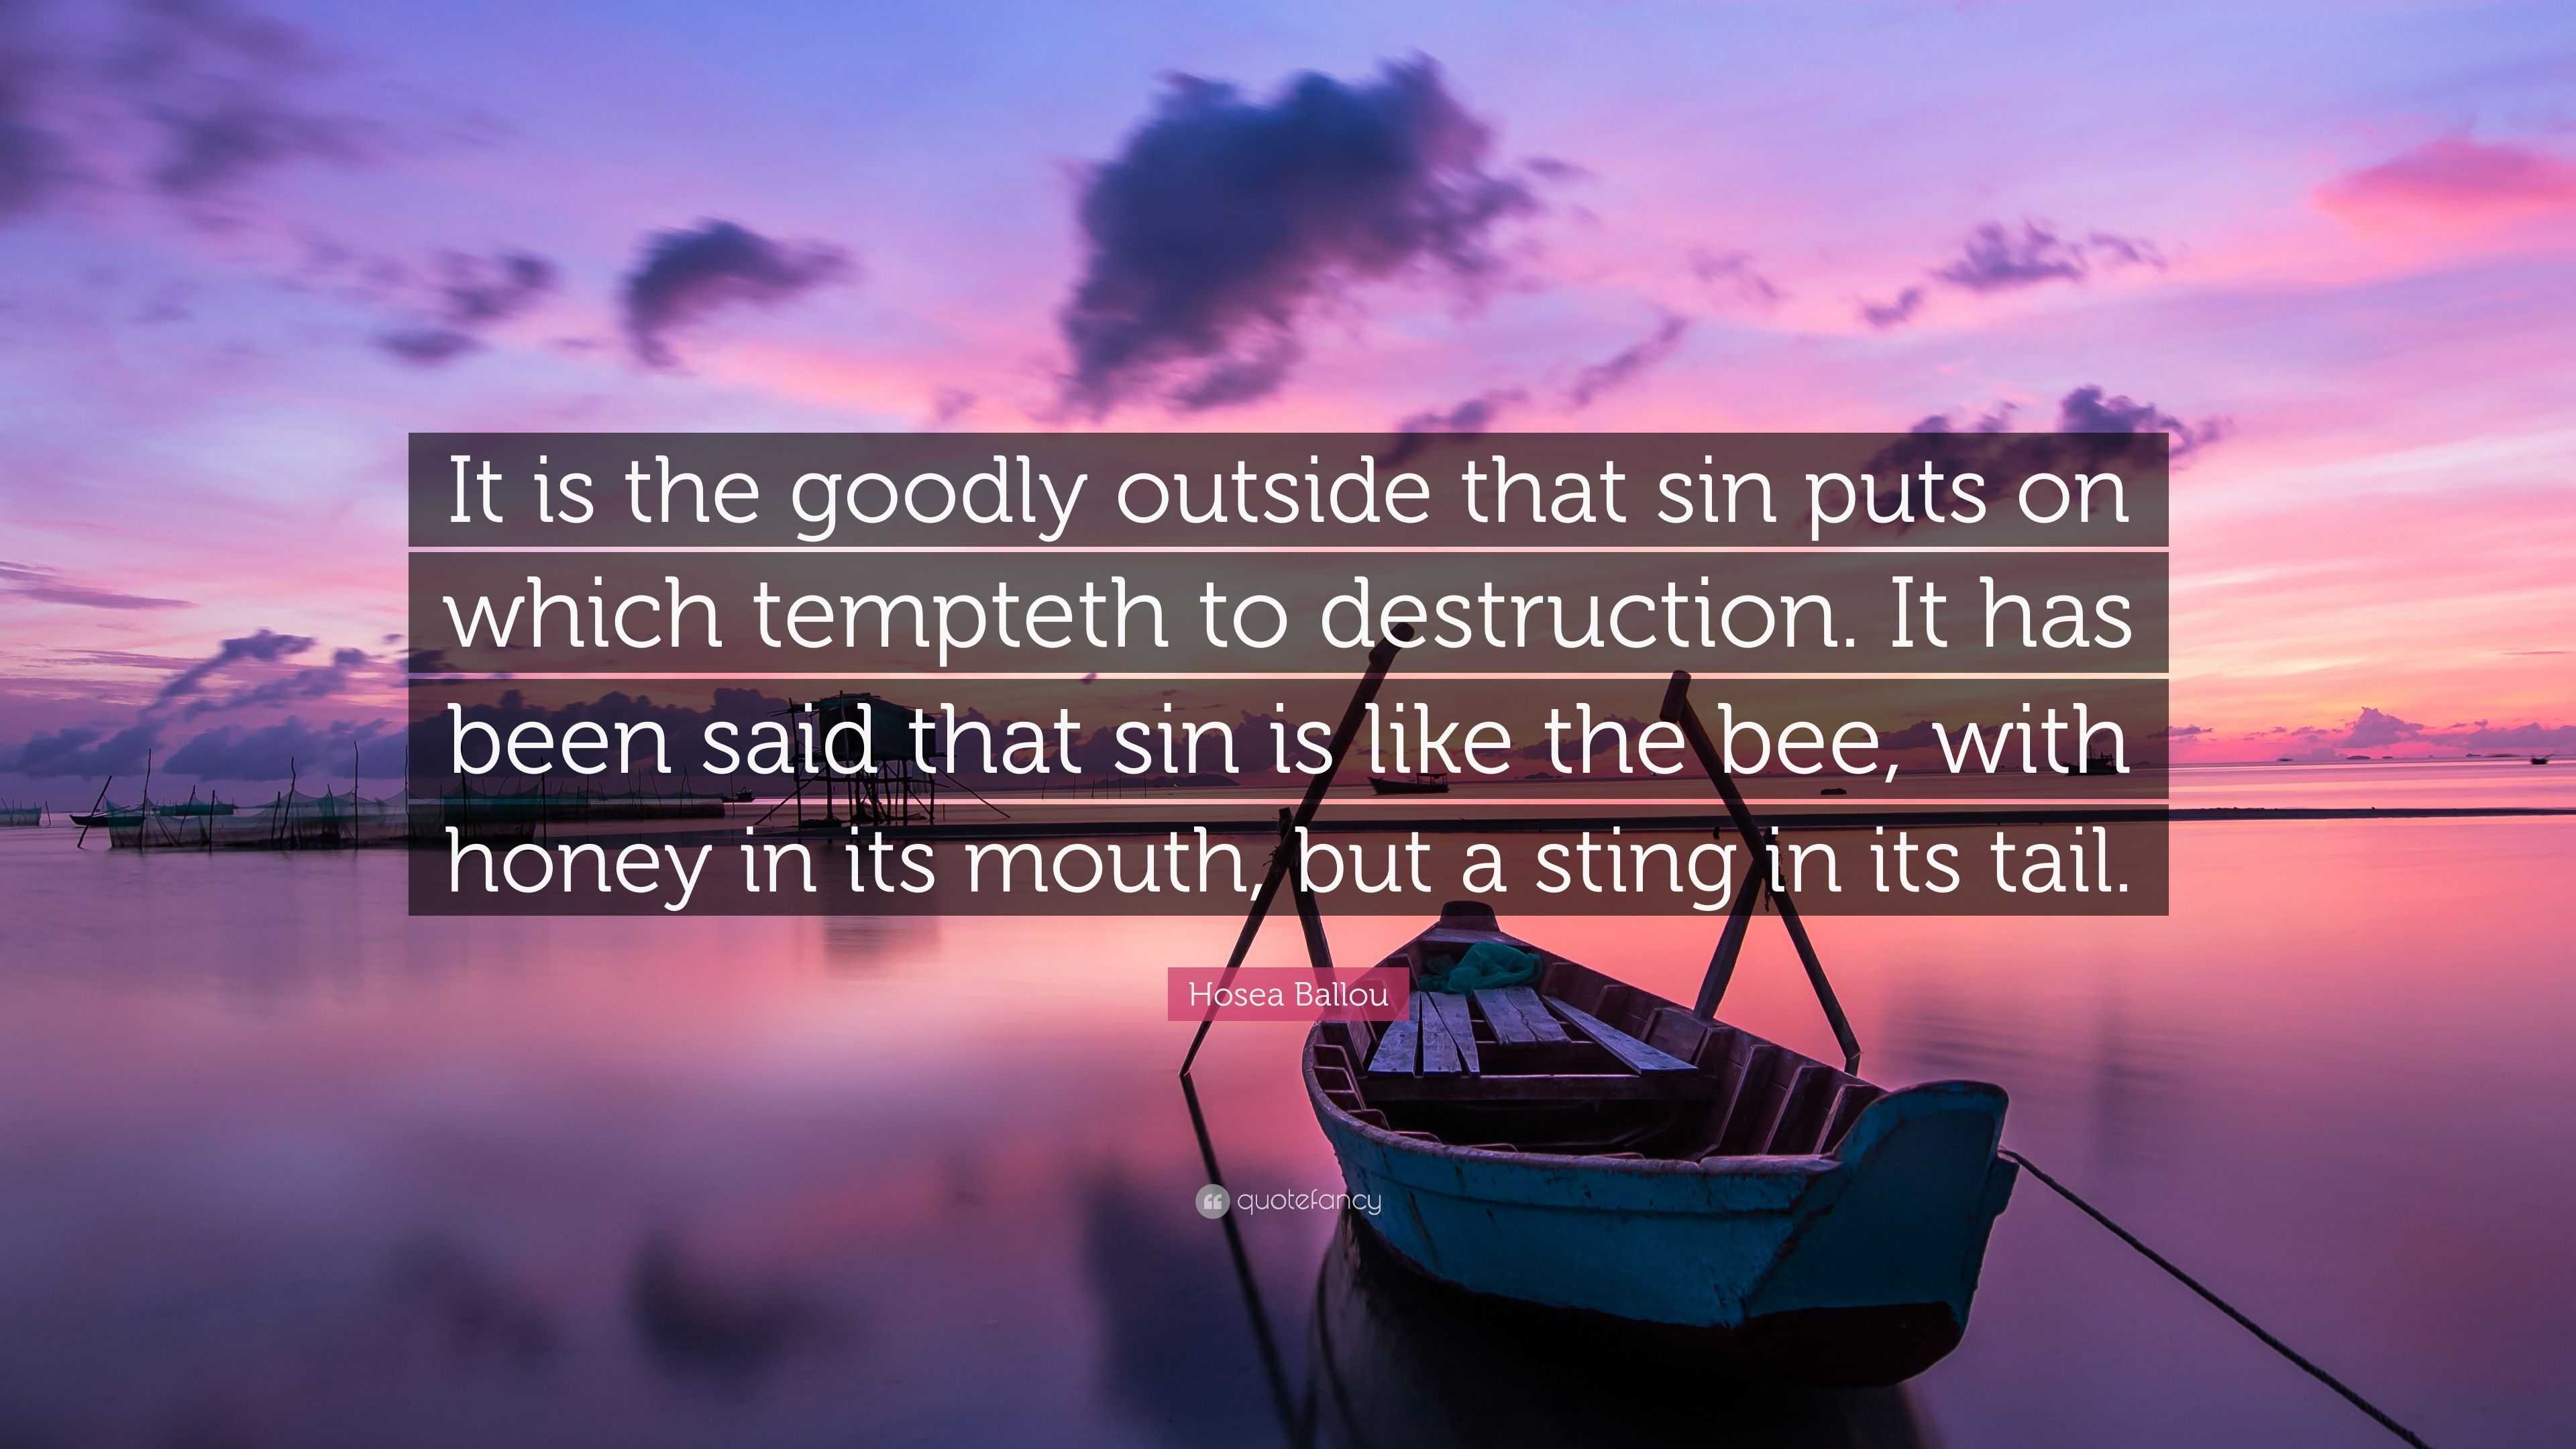 Hosea Ballou Quote: “It is the goodly outside that sin puts on which  tempteth to destruction. It has been said that sin is like the bee